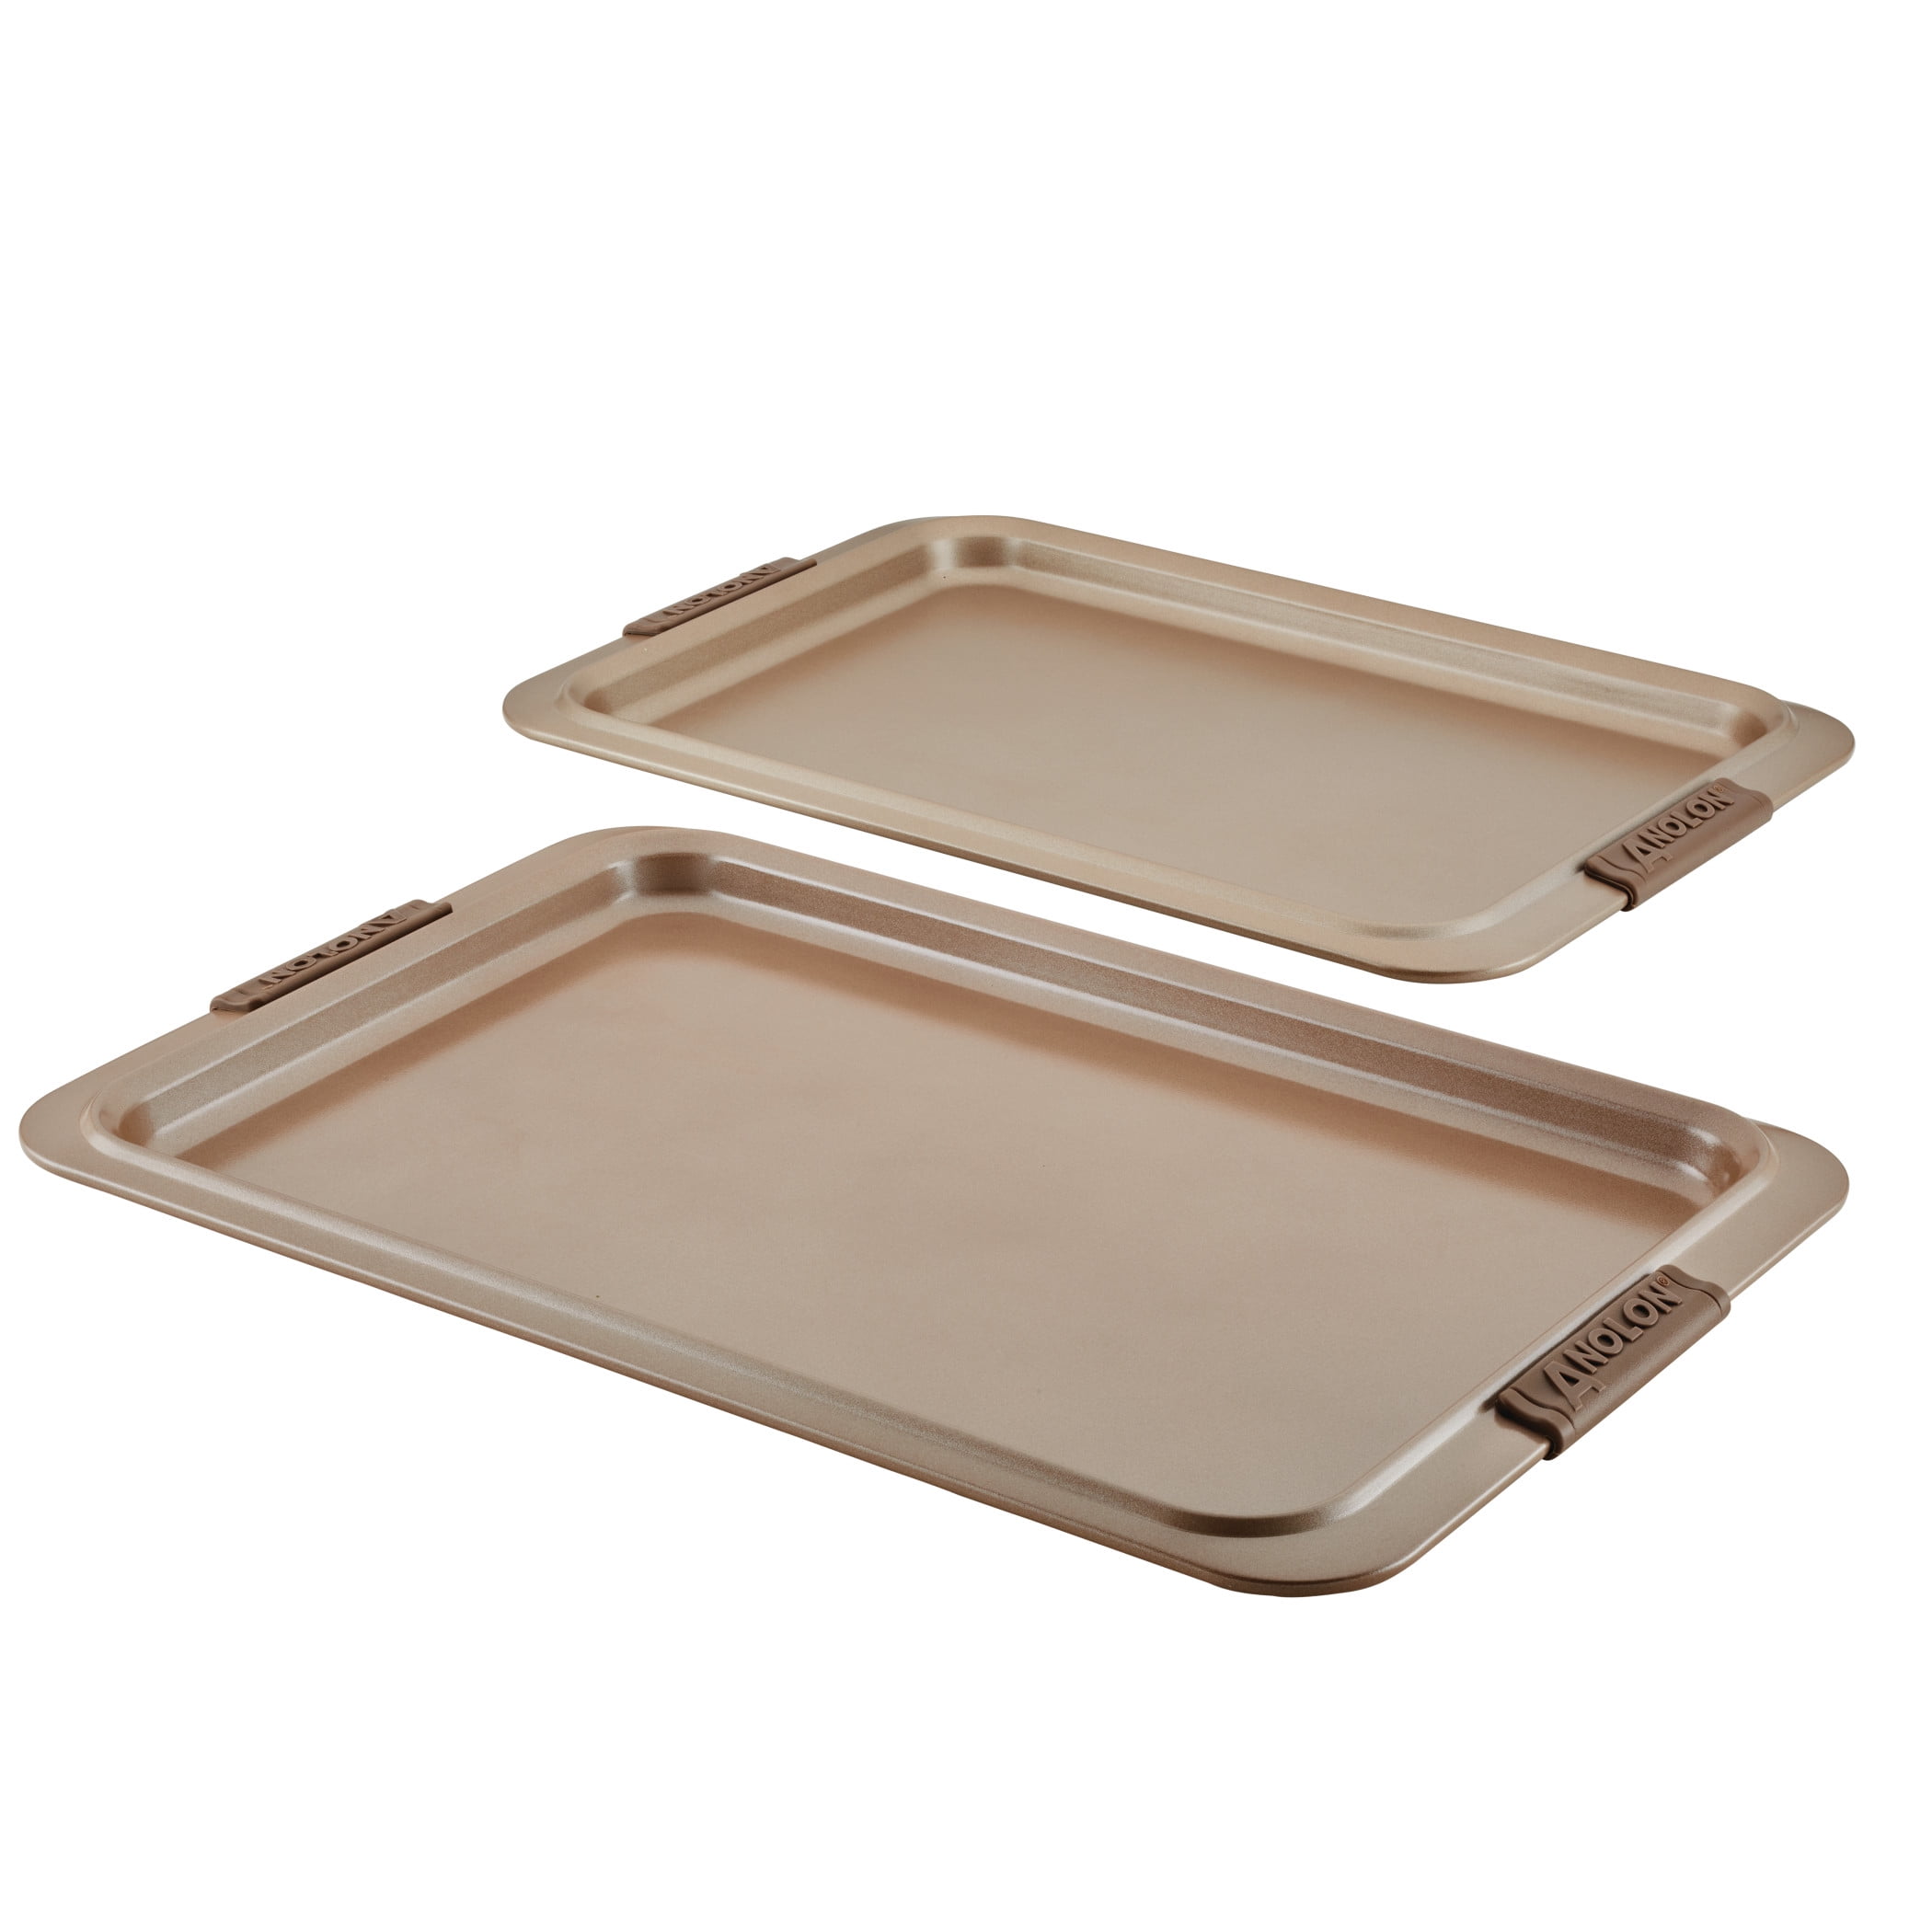 Umite Chef Stainless Steel Baking Pans Tray Details about   Baking Sheet Cookie Sheet Set of 2 